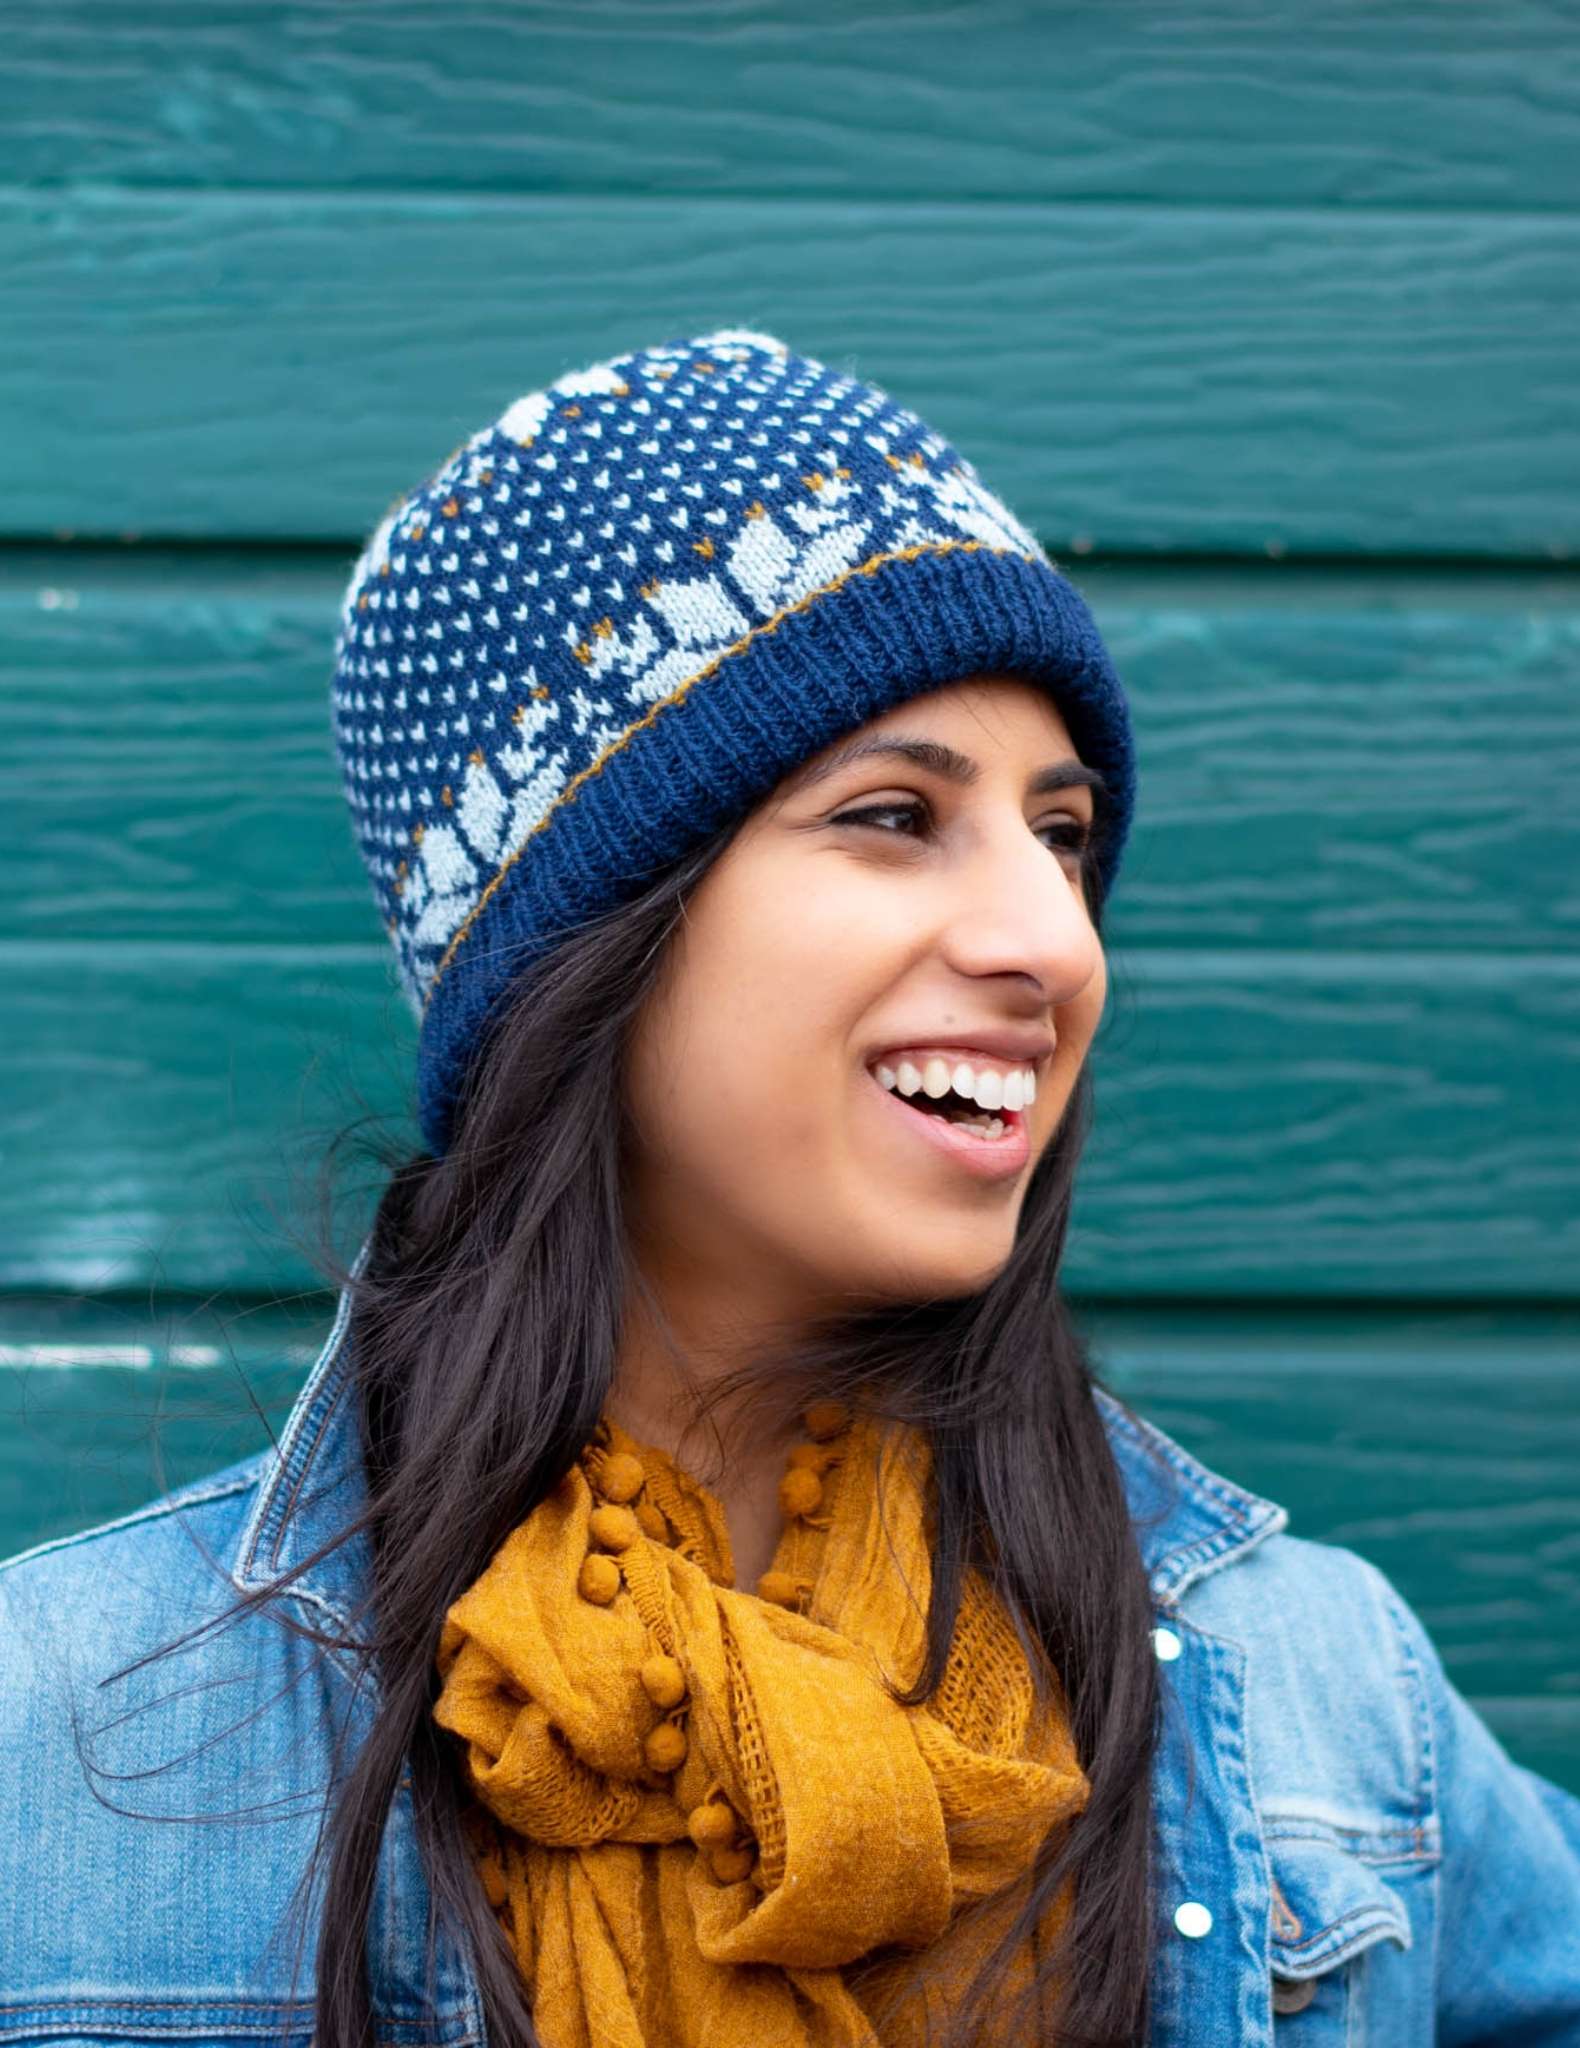 a woman with dark hair wears a dark blue and white colourwork hat, a yellow scarf and open denim jacket